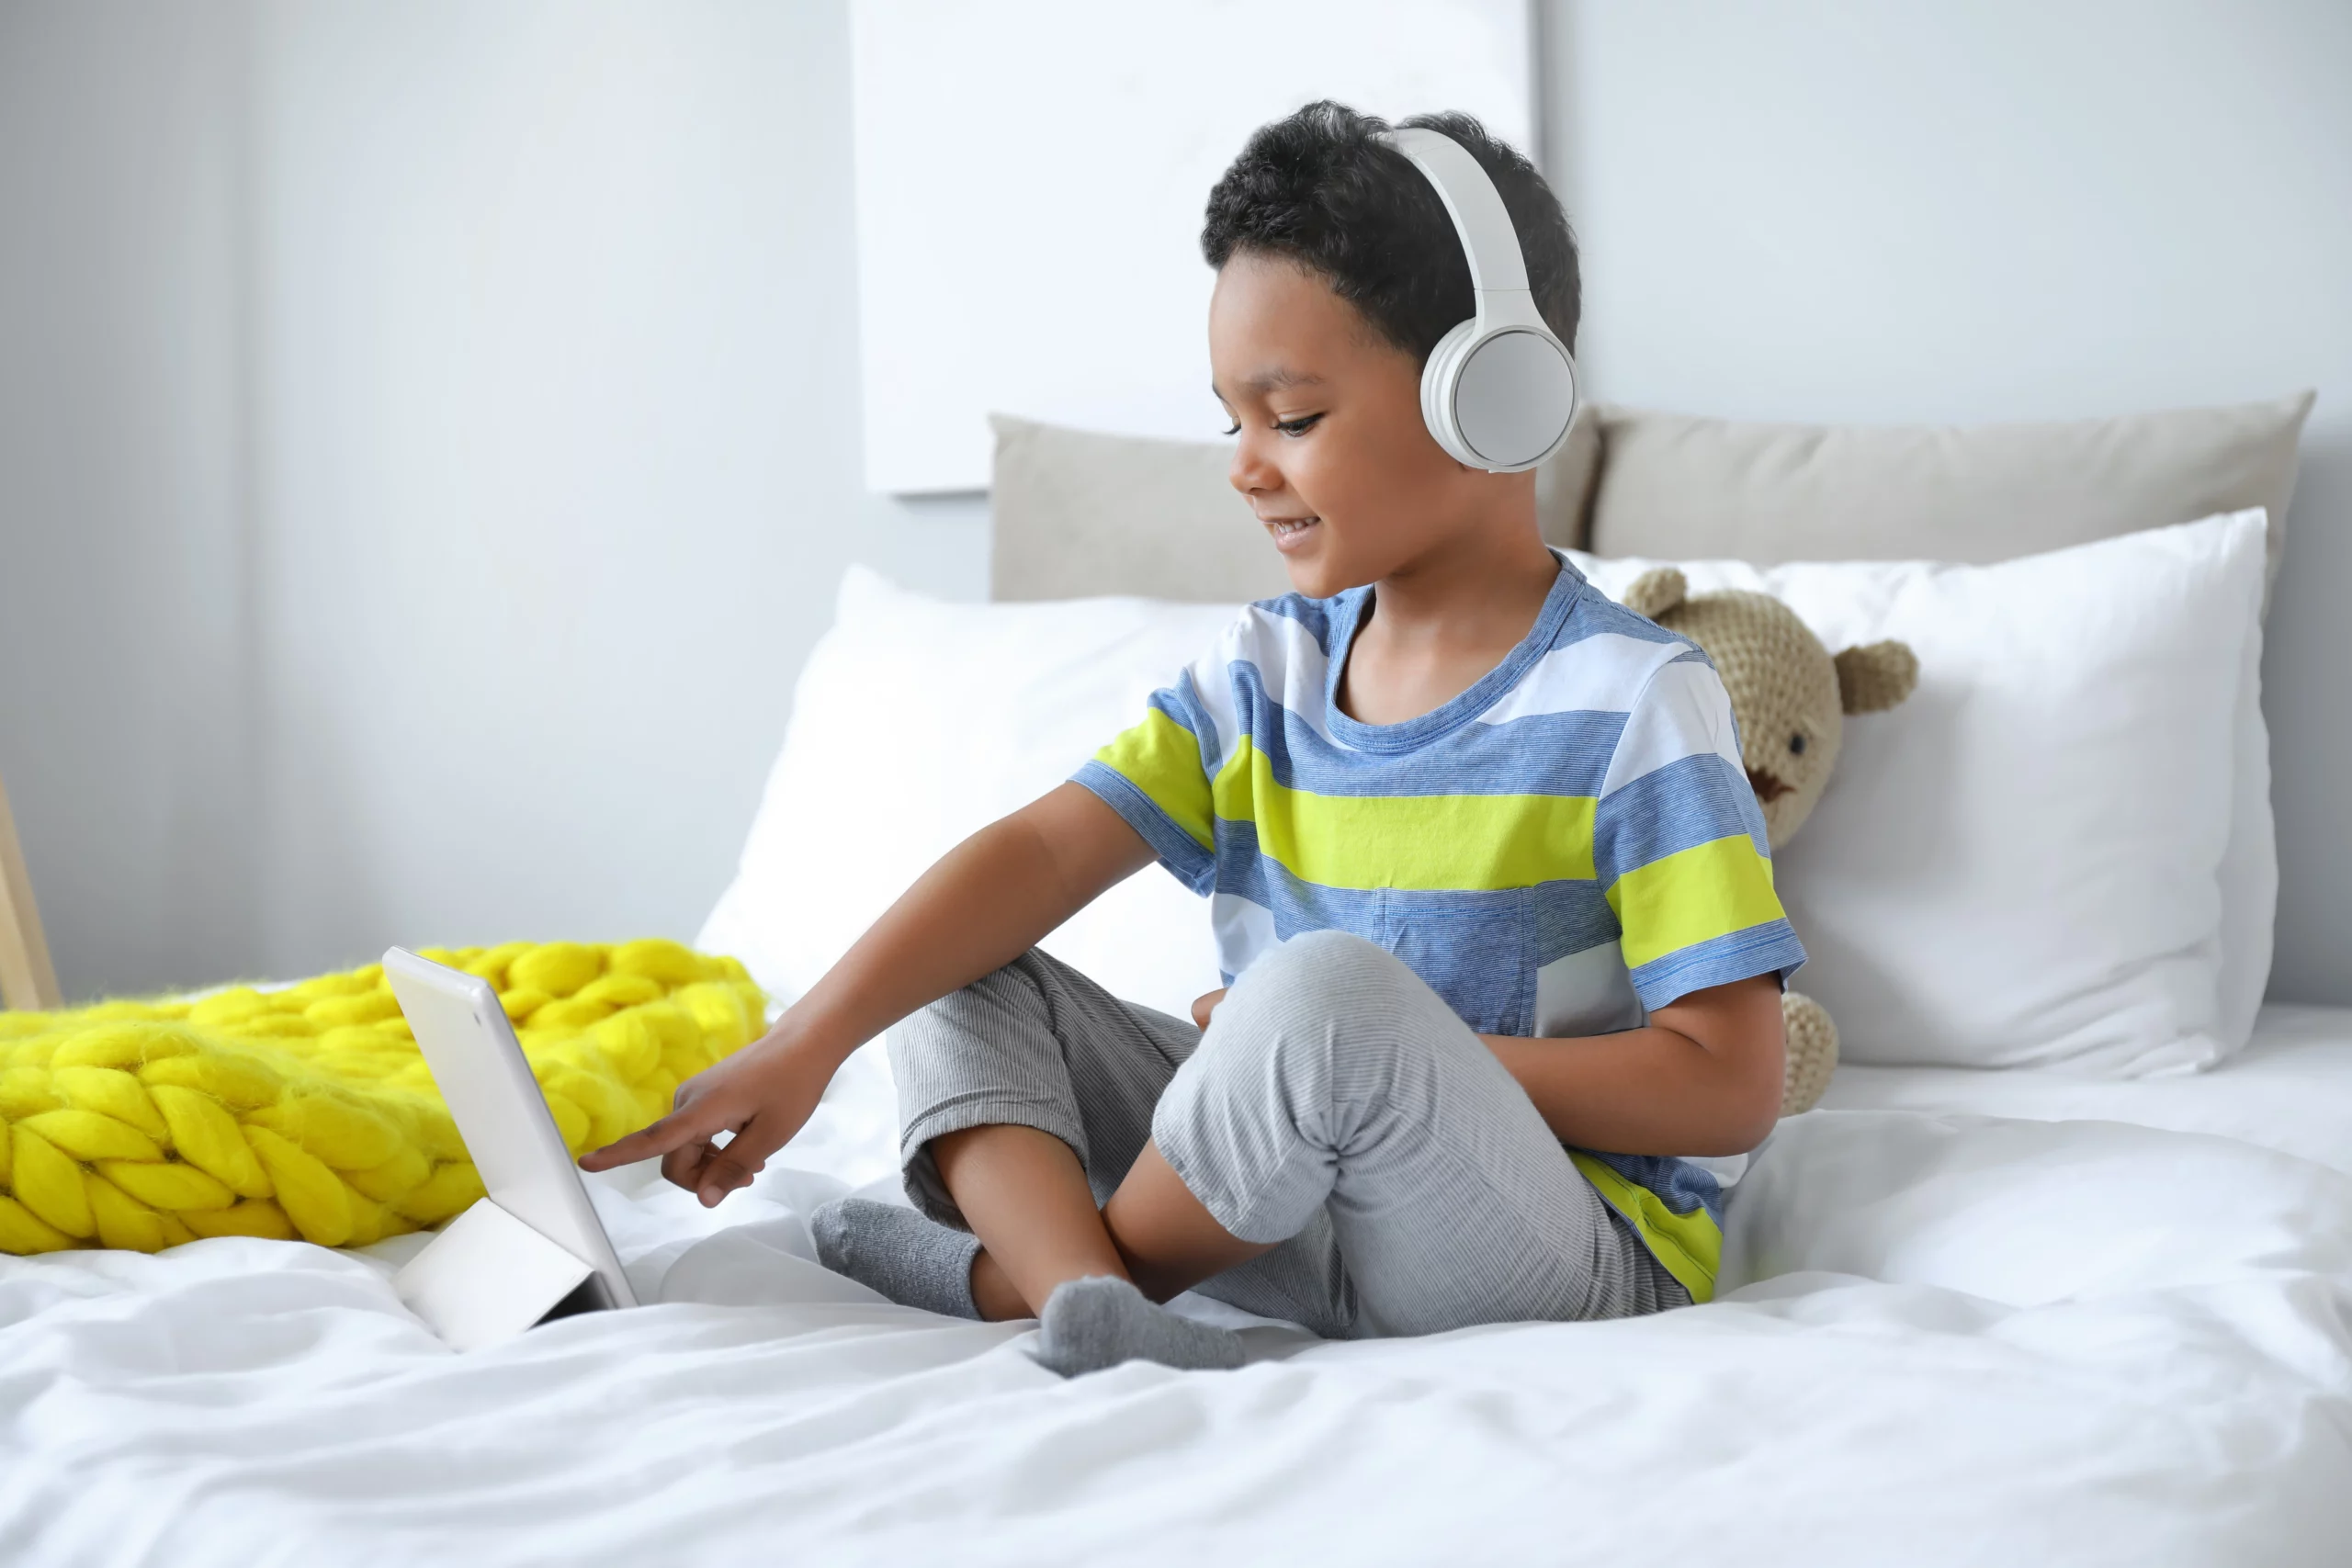 Where to watch kid friendly videos for free - swoosh finance